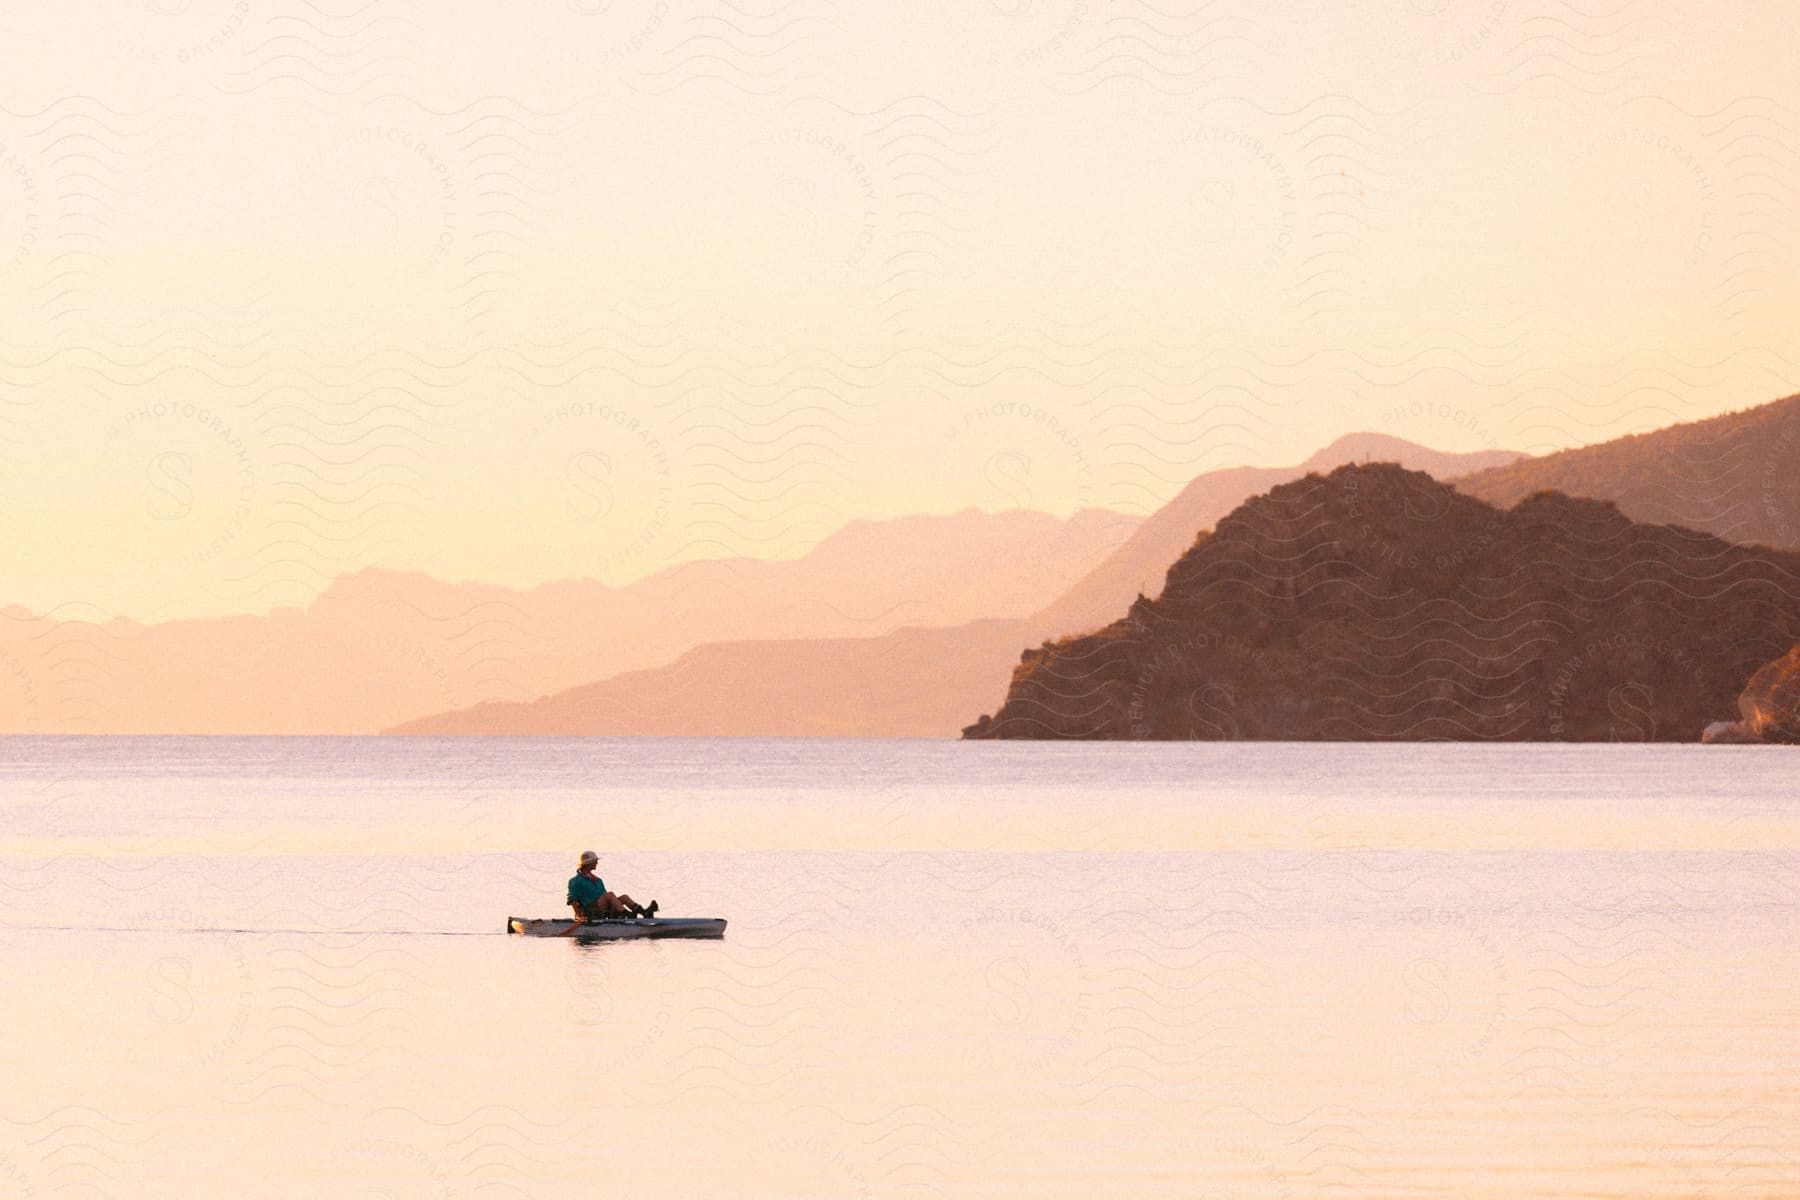 A man in a paddleboat before a mountainous coast.